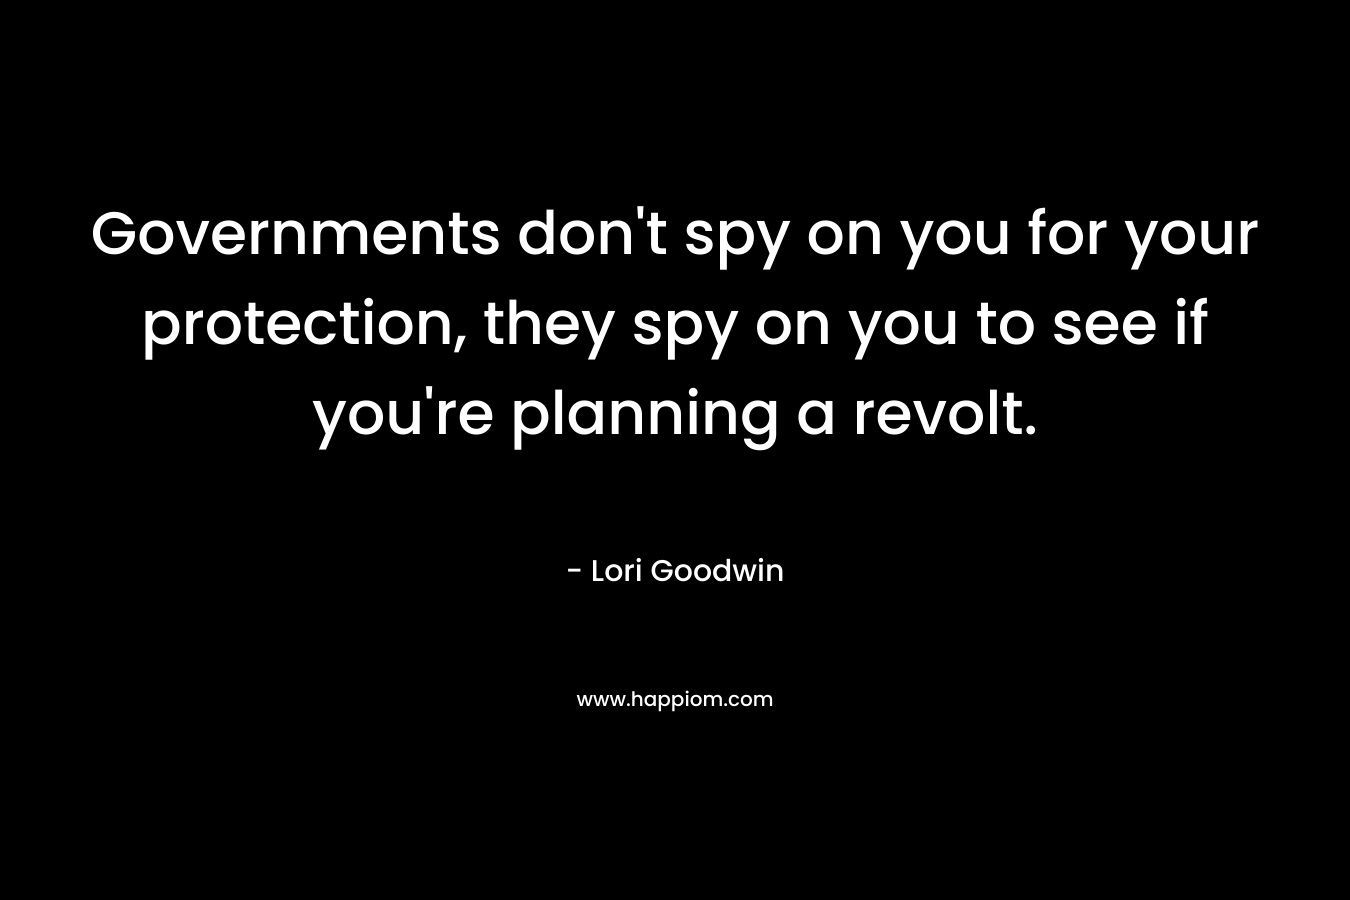 Governments don’t spy on you for your protection, they spy on you to see if you’re planning a revolt. – Lori Goodwin